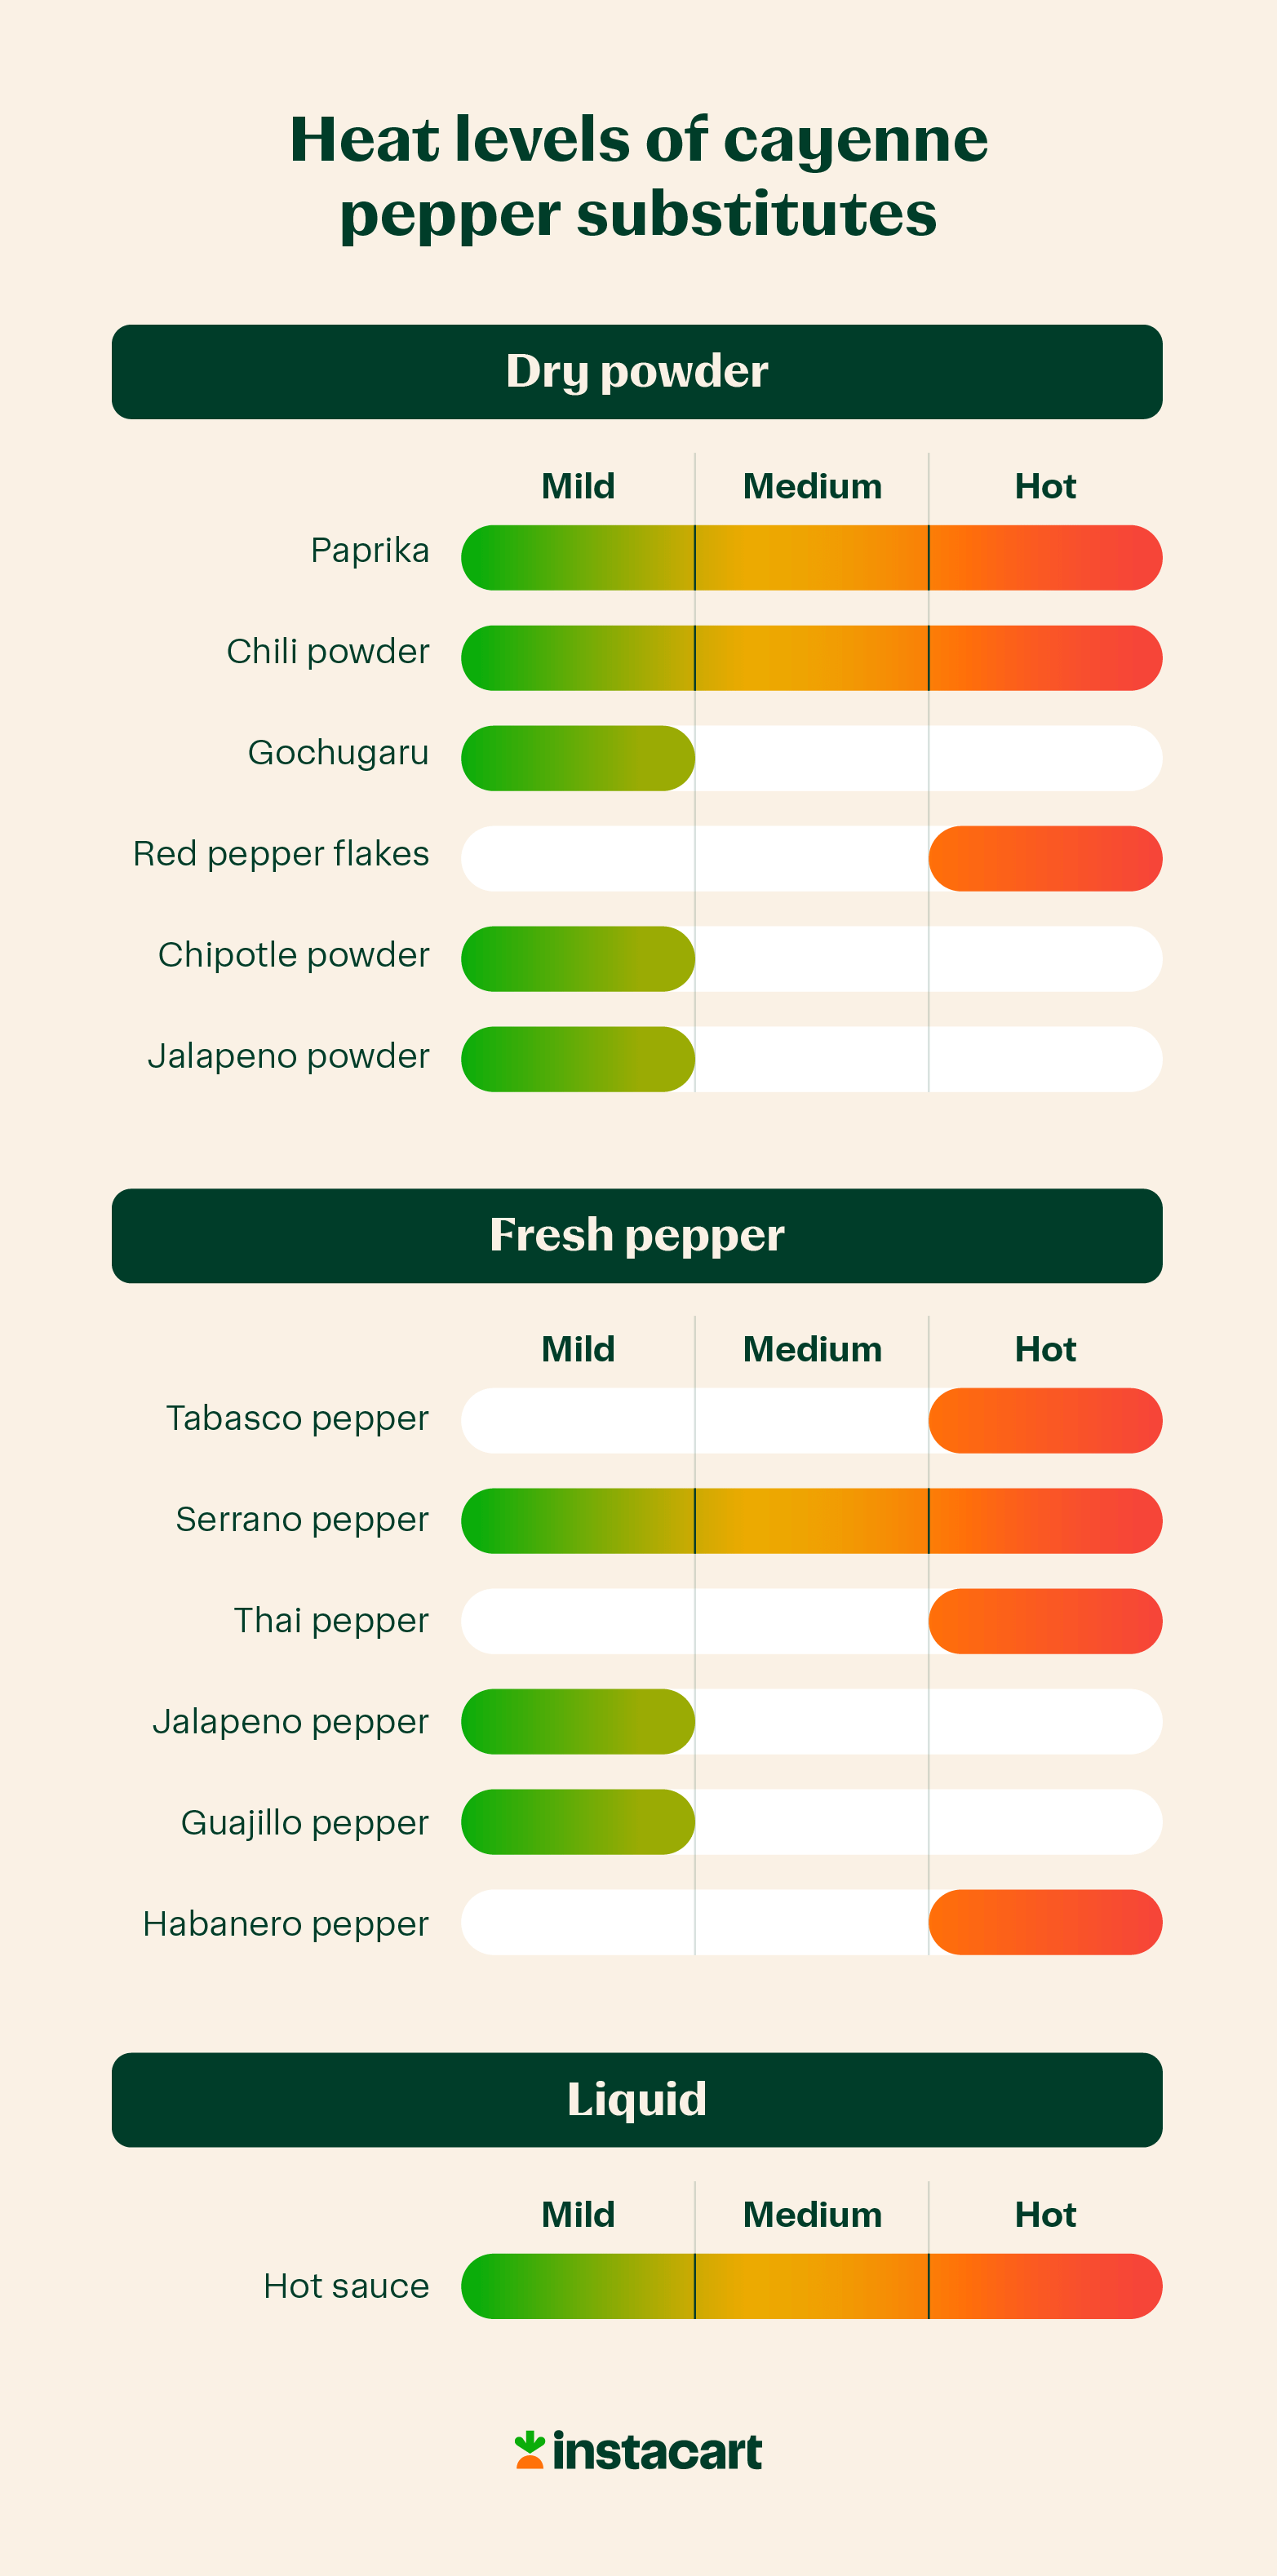 image of the different heat levels of cayenne pepper substitutes